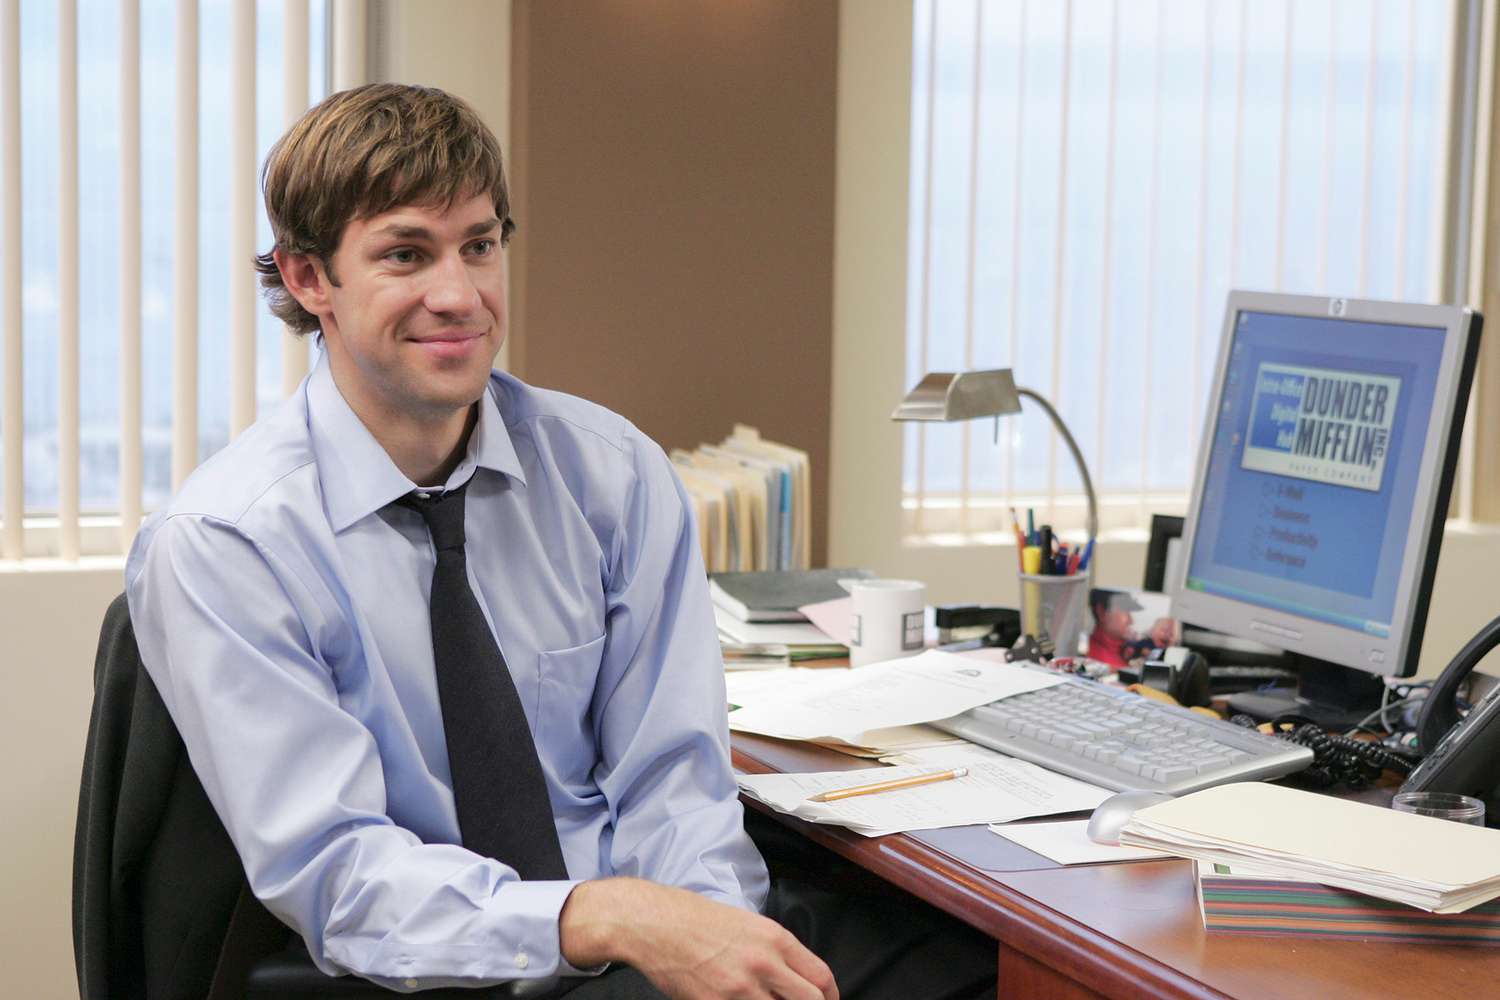 John Krasinski Reveals What He 'Stole' from the Set of 'The Office' but Has 'Always Lied' About